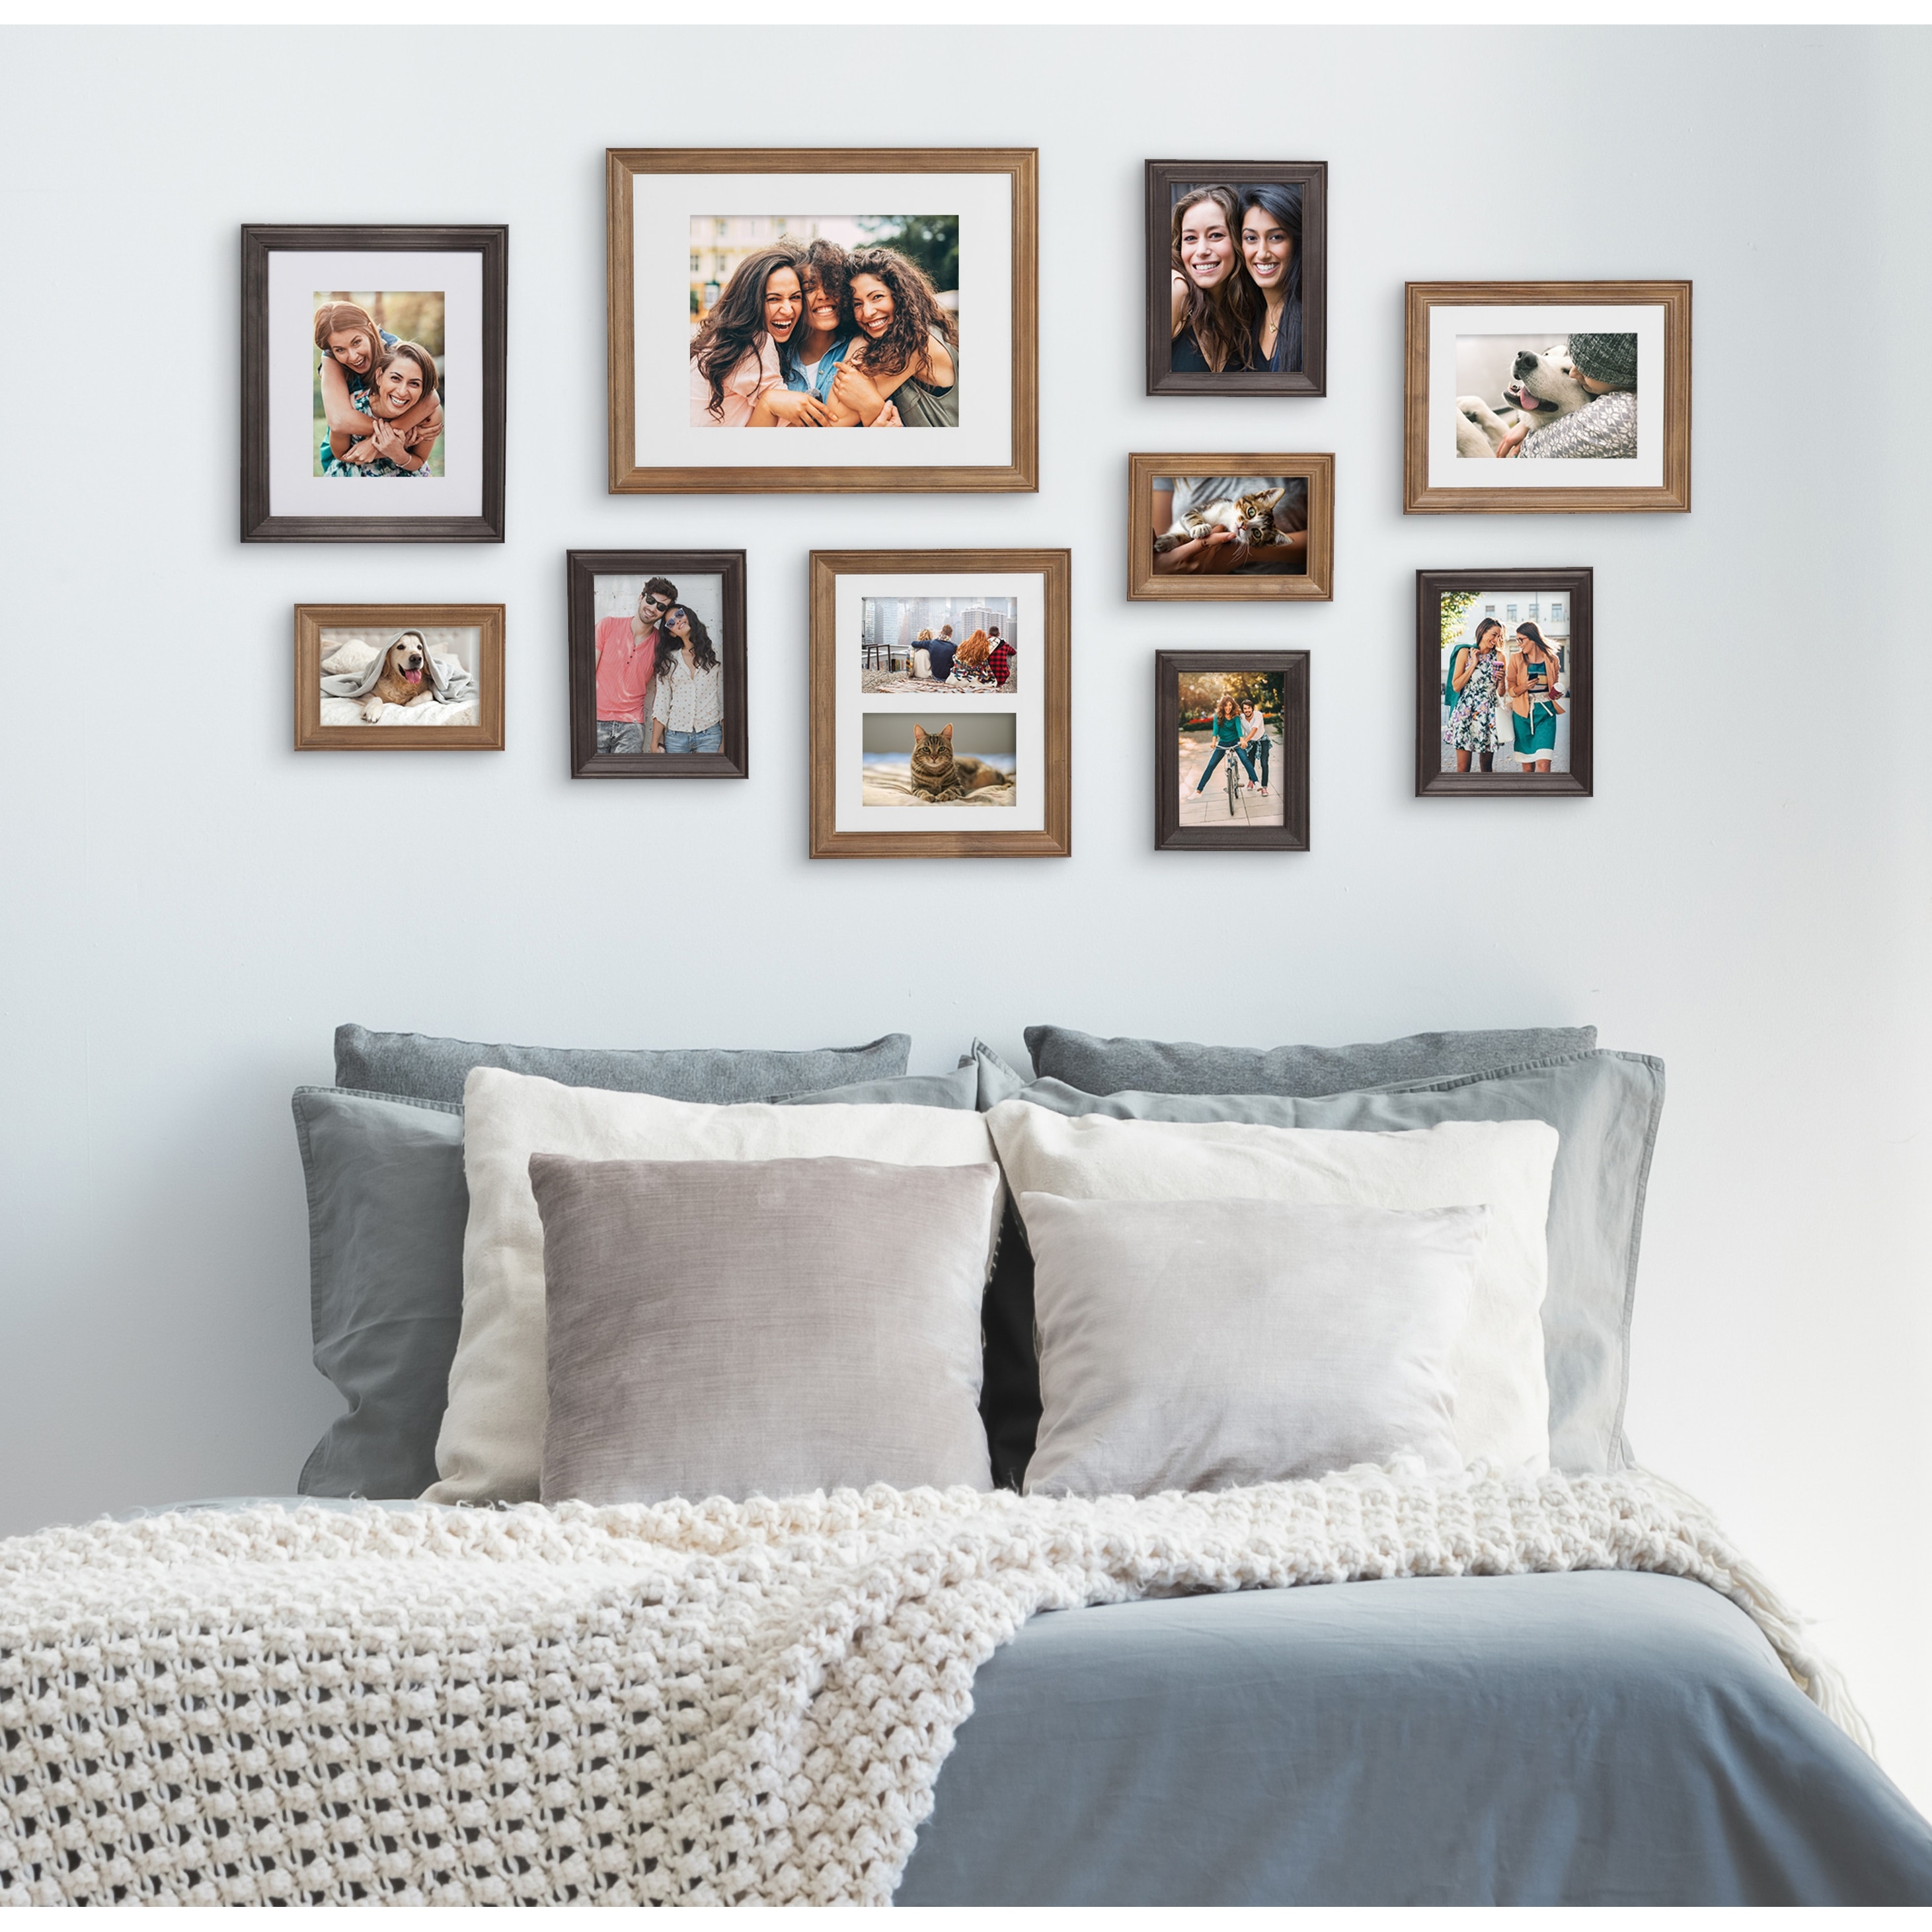 4x6 Natural Picture Frame Set Pack of 2 4x6 Wood Picture Frames for Gallery  Wall 2 4x6 Natural Frames - Bed Bath & Beyond - 38785600